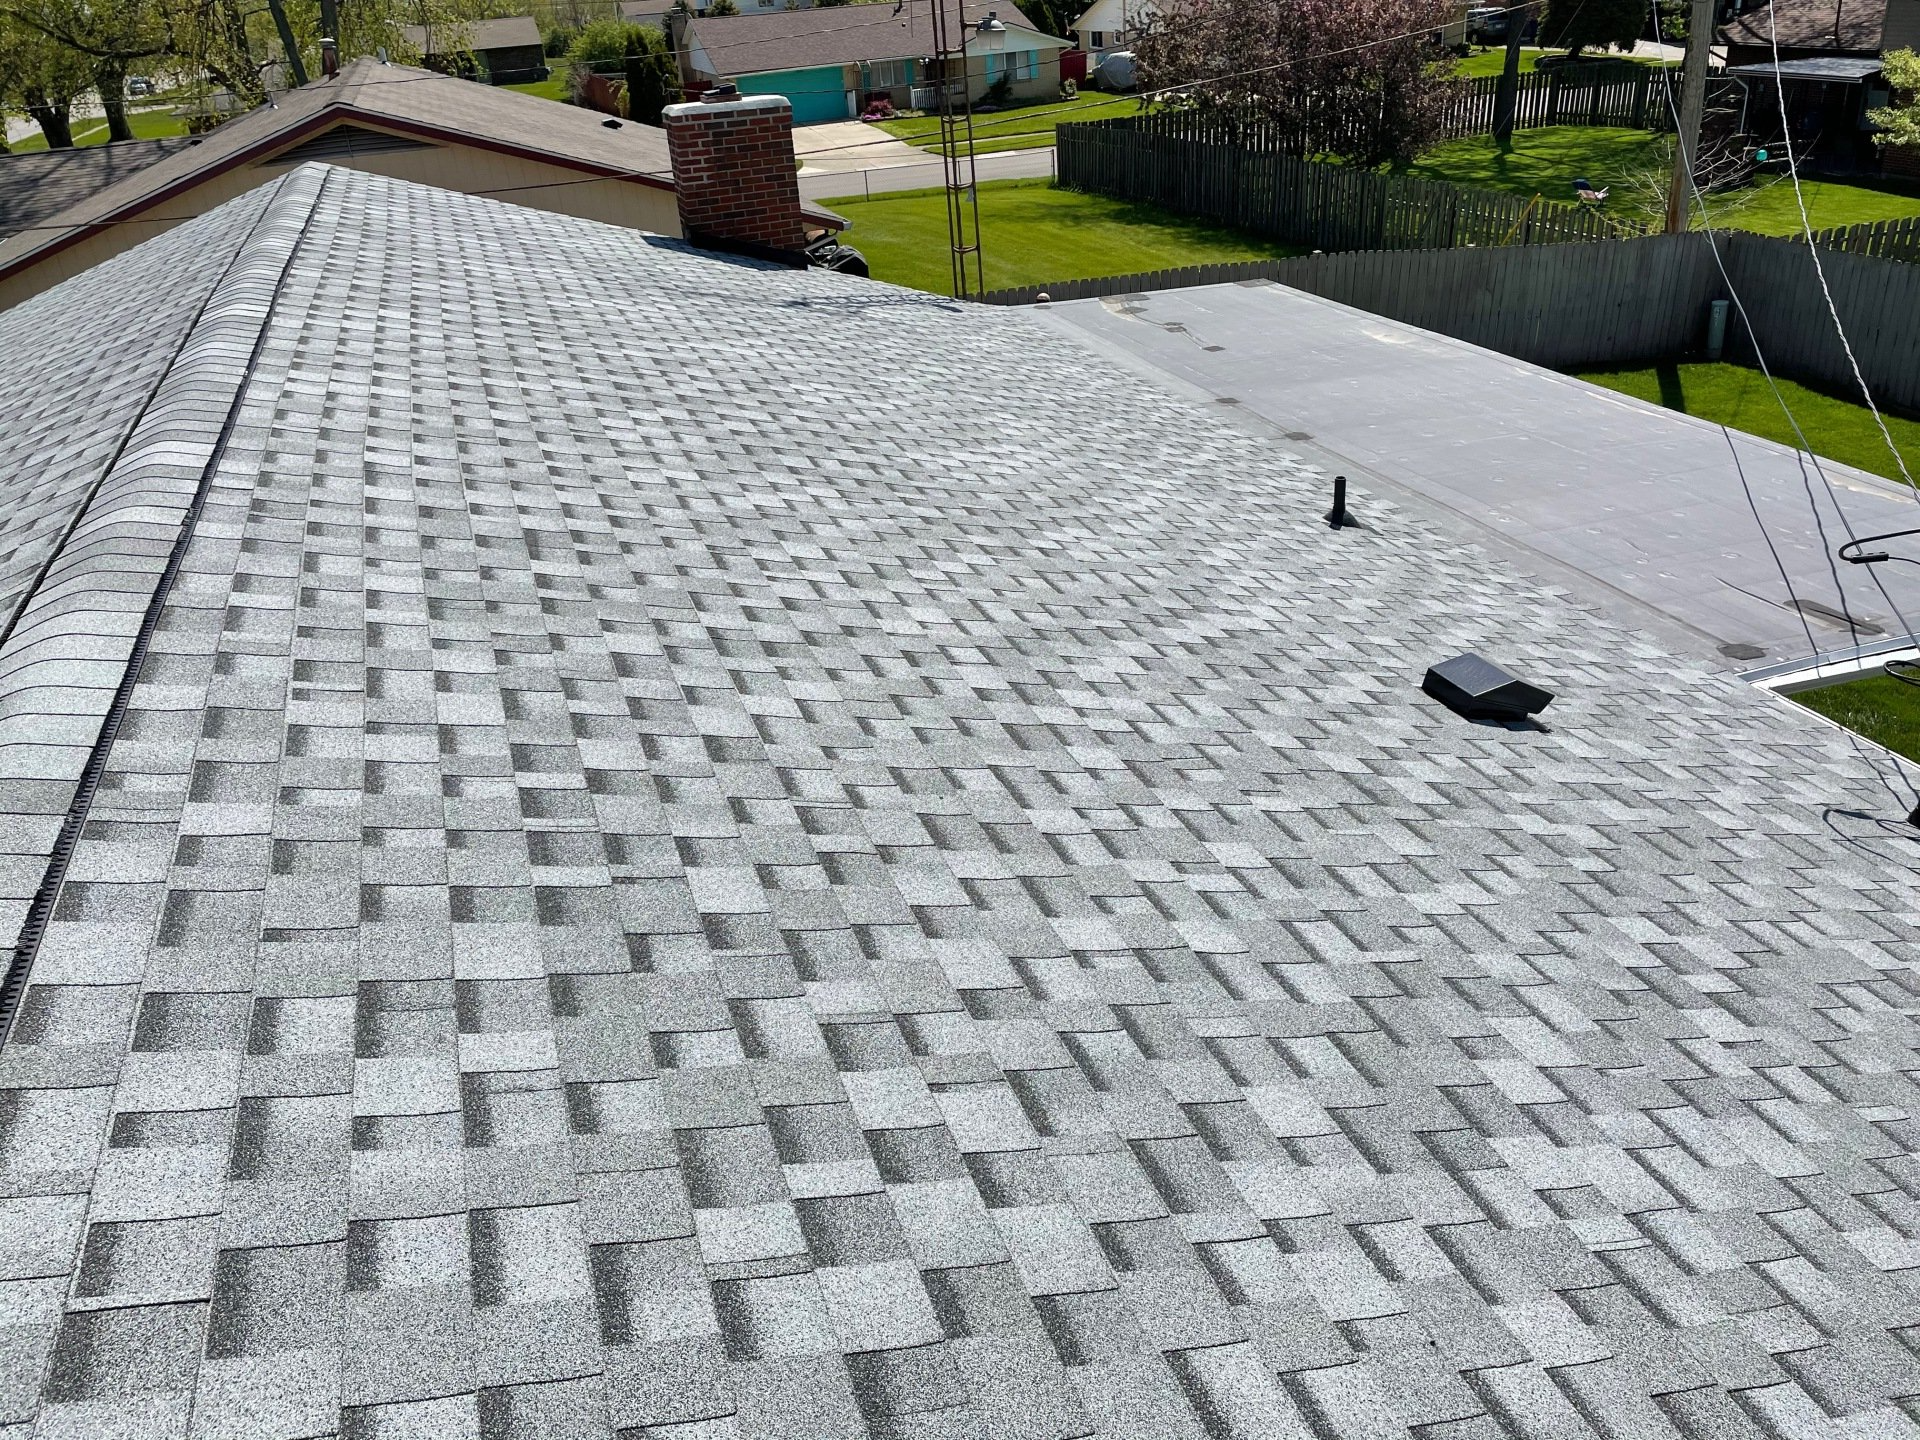 dayton ohio roof replacement - after image